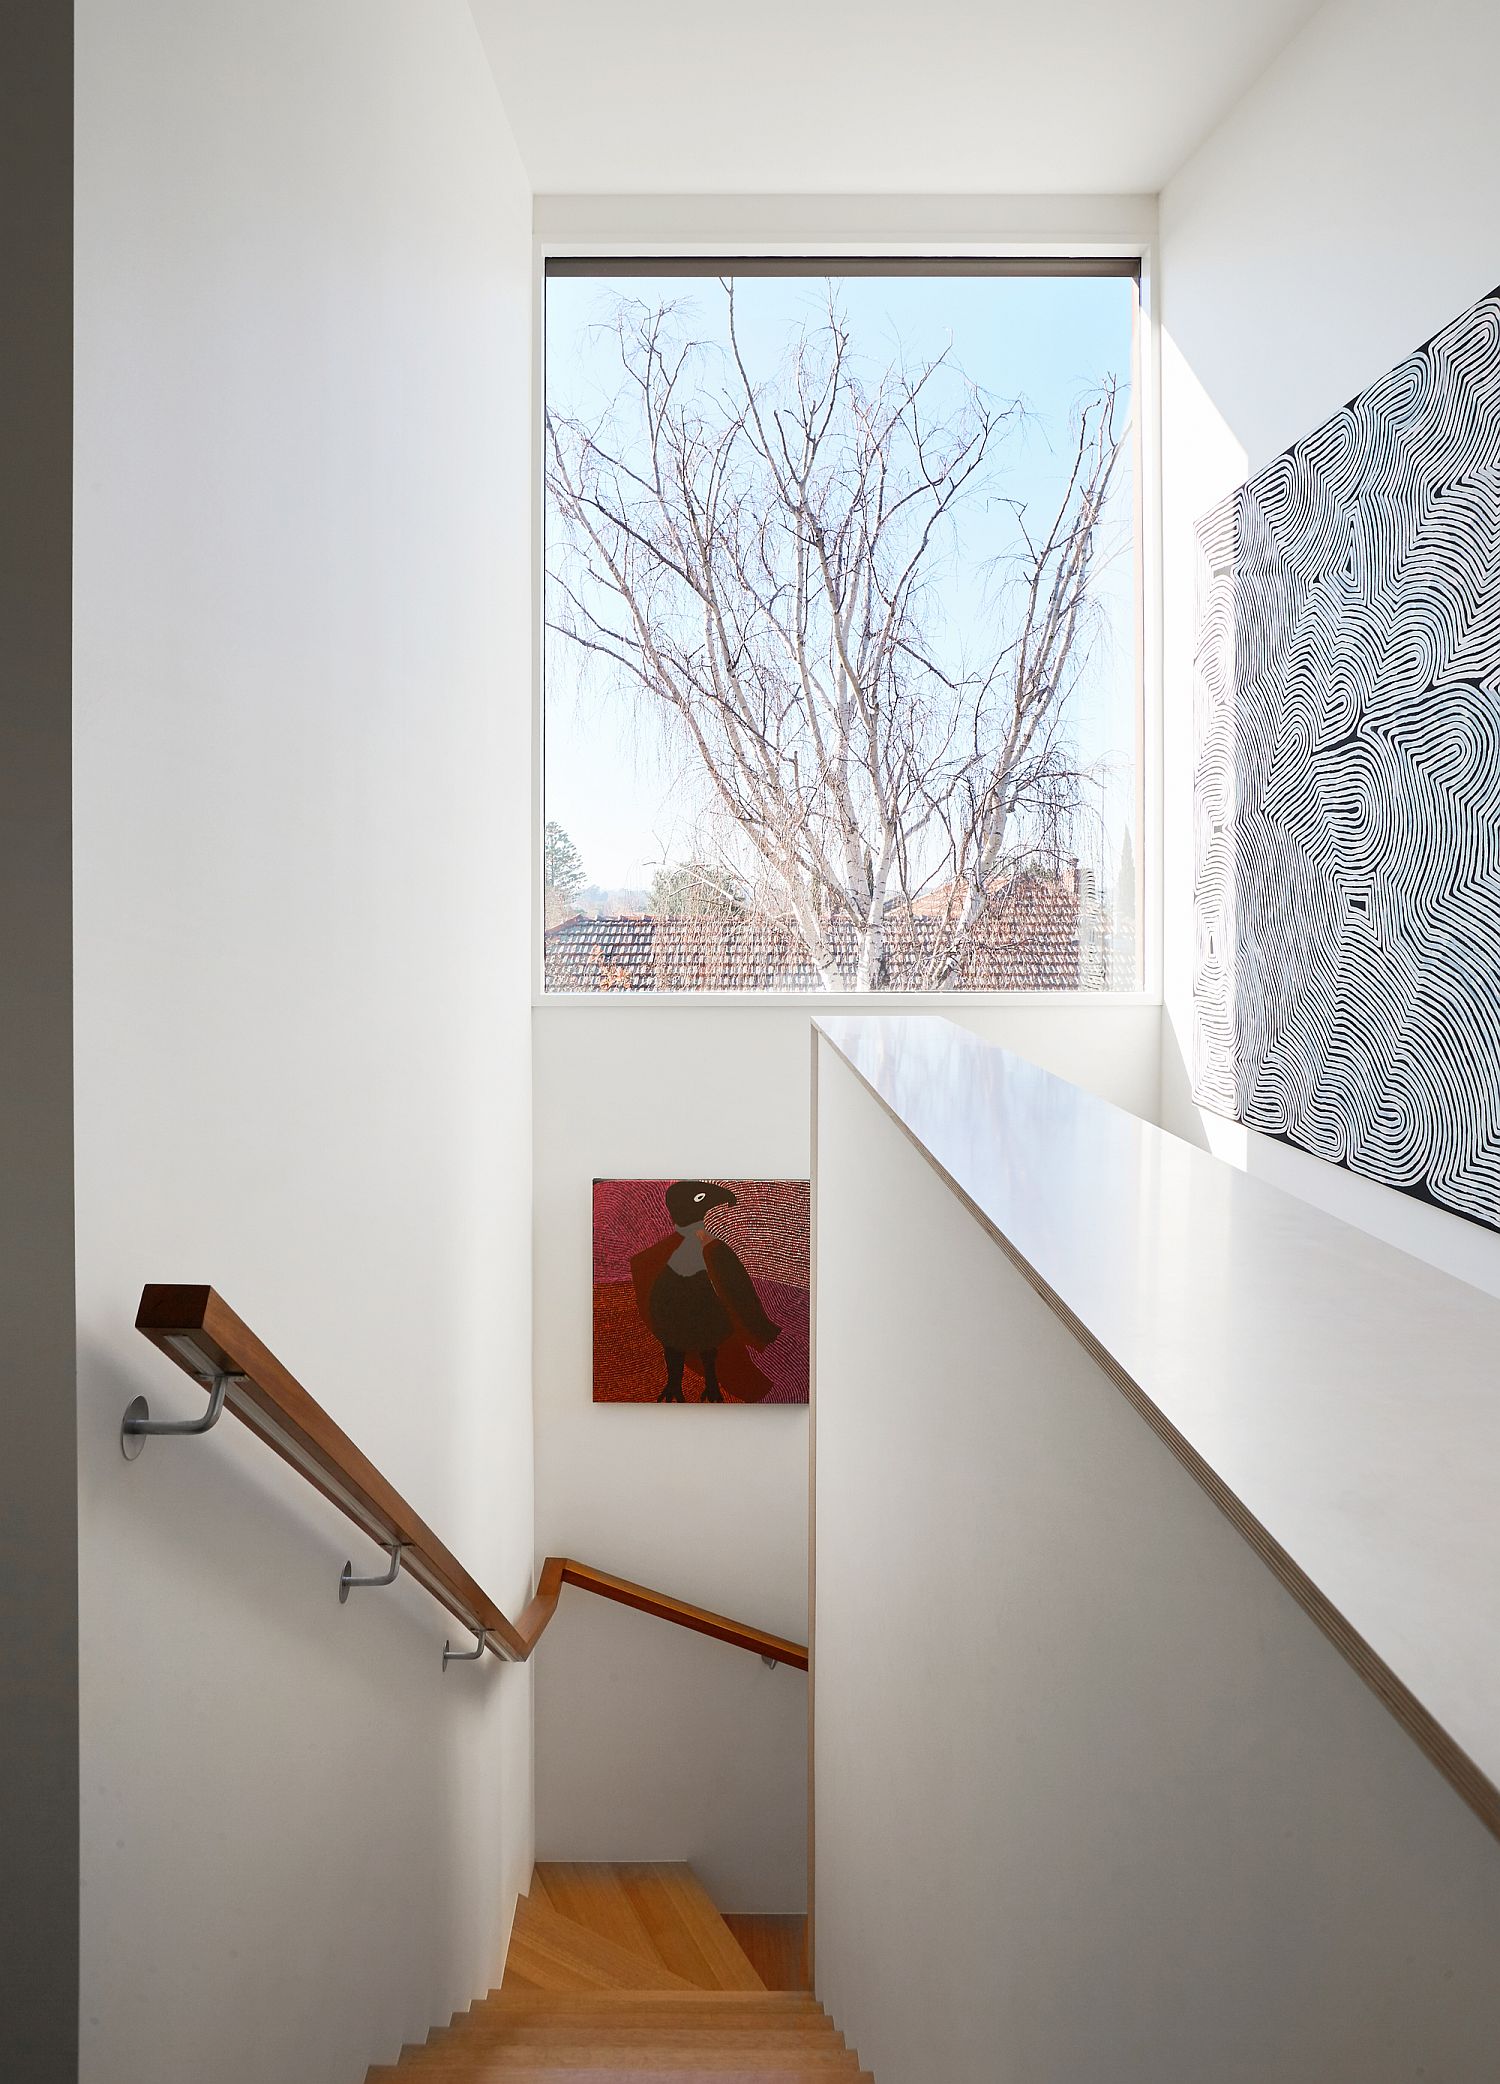 Window for the stairwell brings light into different levels of the house